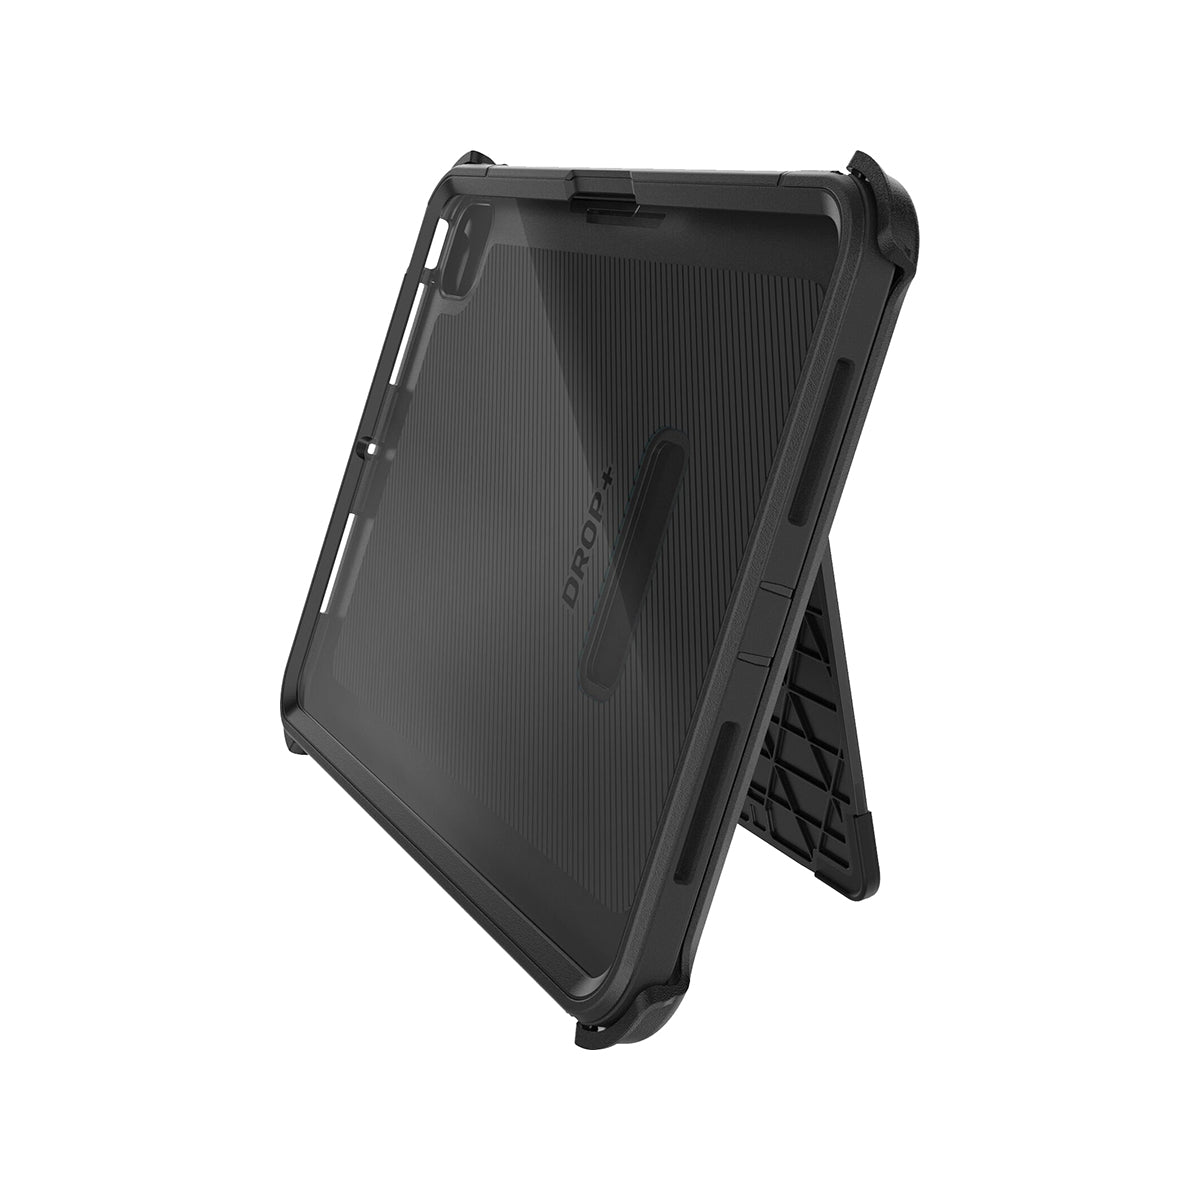 OtterBox Defender Rugged Tablet Case for iPad Pro 11